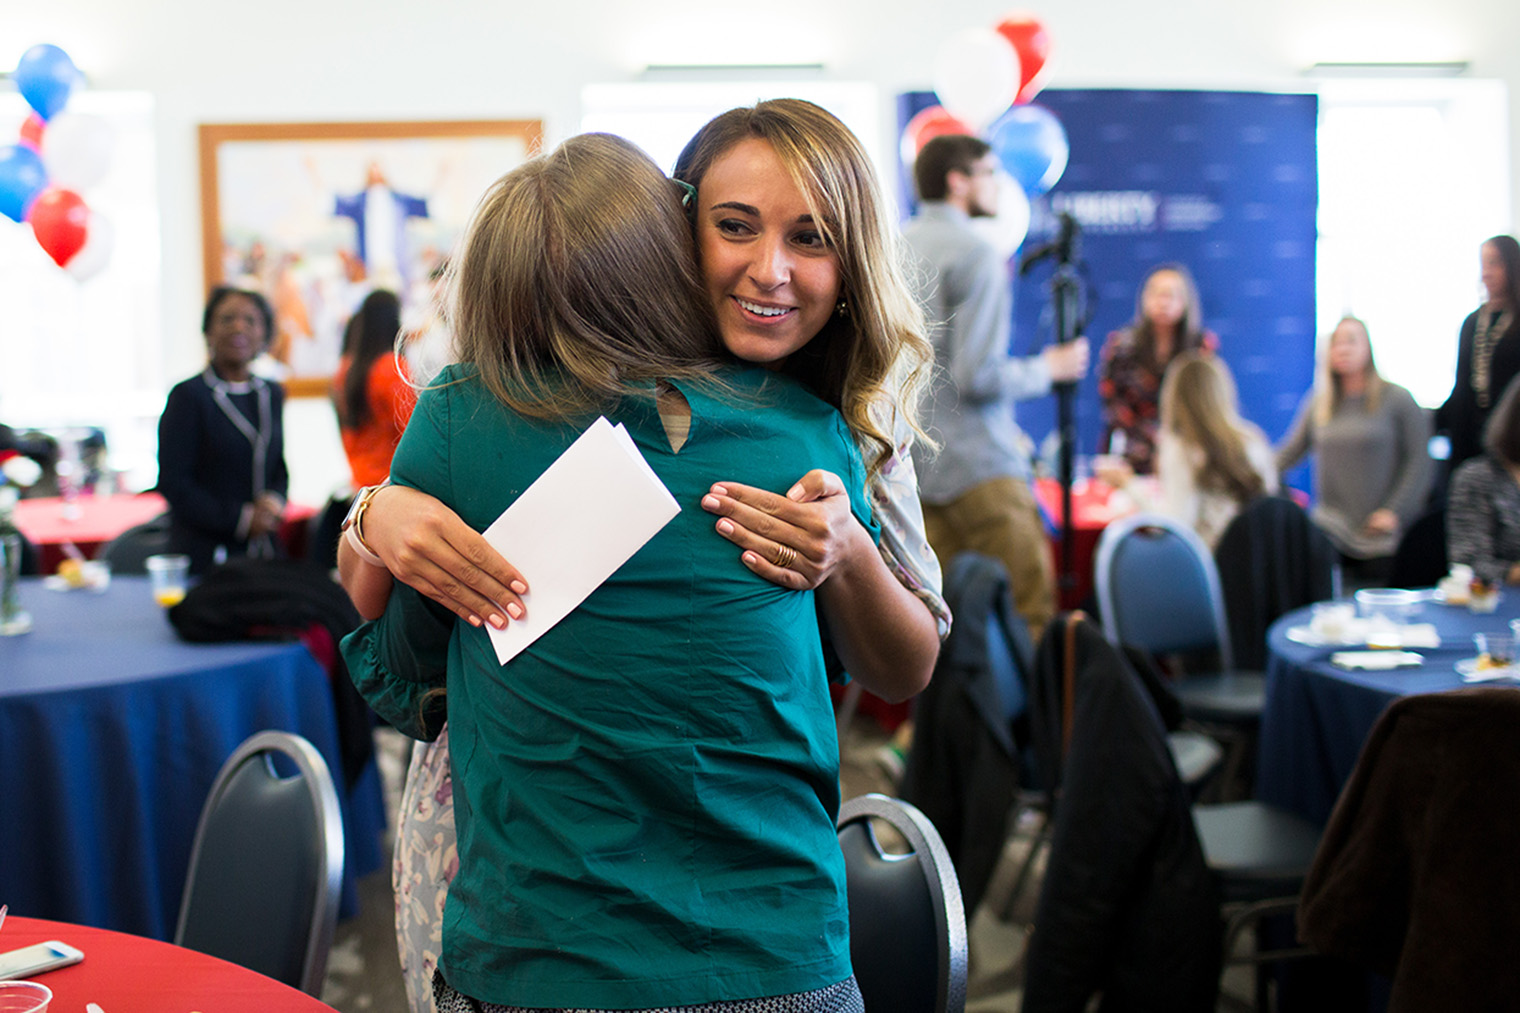 Kiersten Pikarsky hugs Kindra Galloway after receiving their placements. (Photo by Leah Seavers)